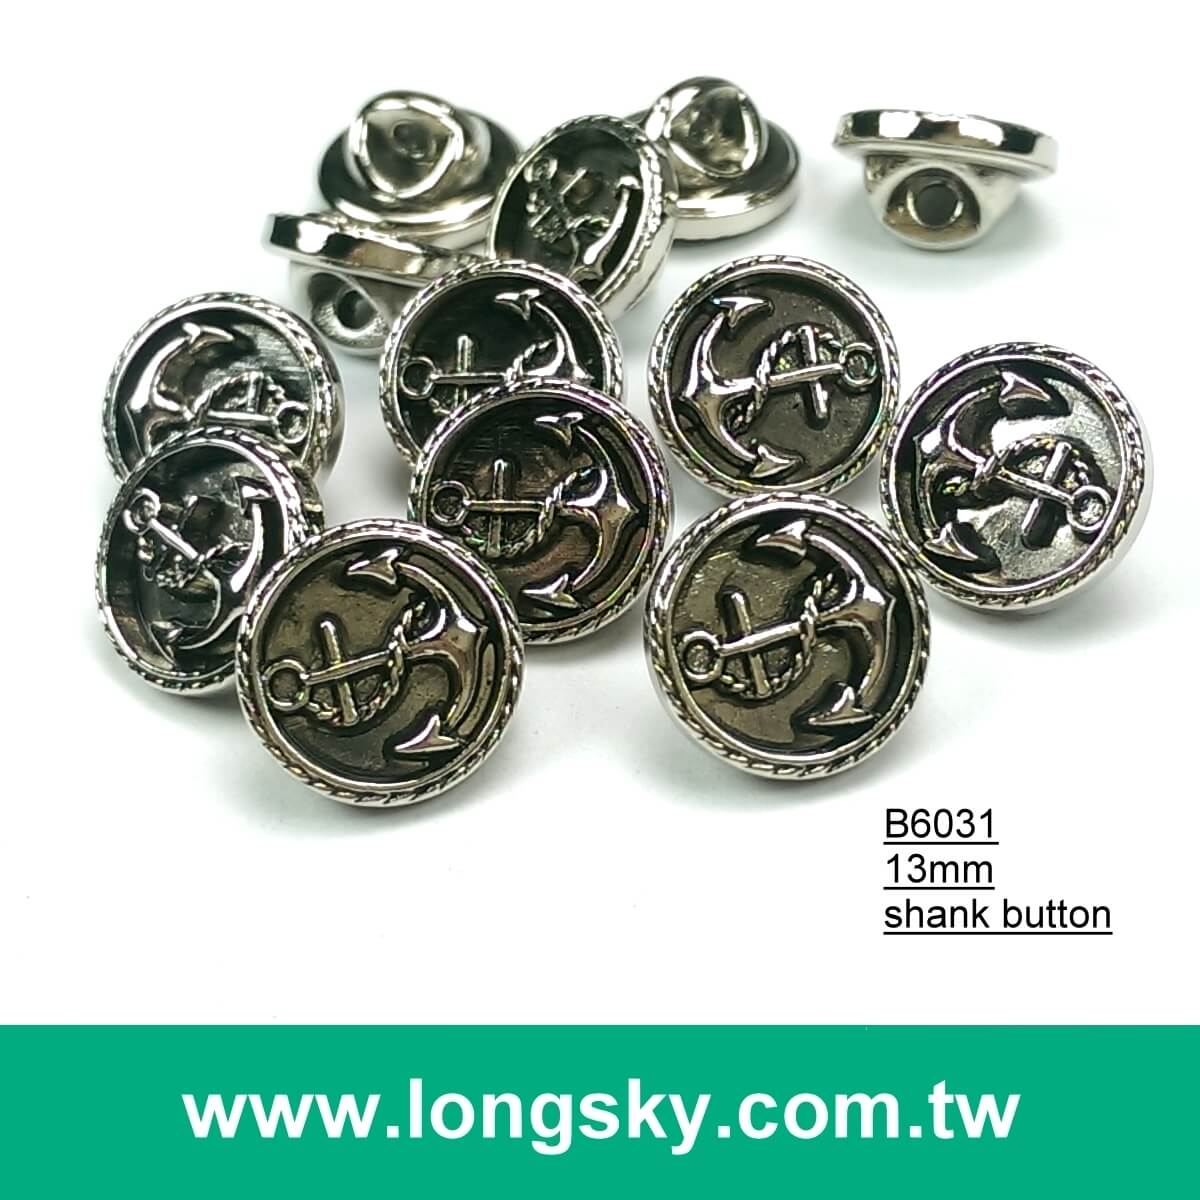 (#B6031/13mm) Sea anchor pattern on gold plated abs button with shank for navy style clothing